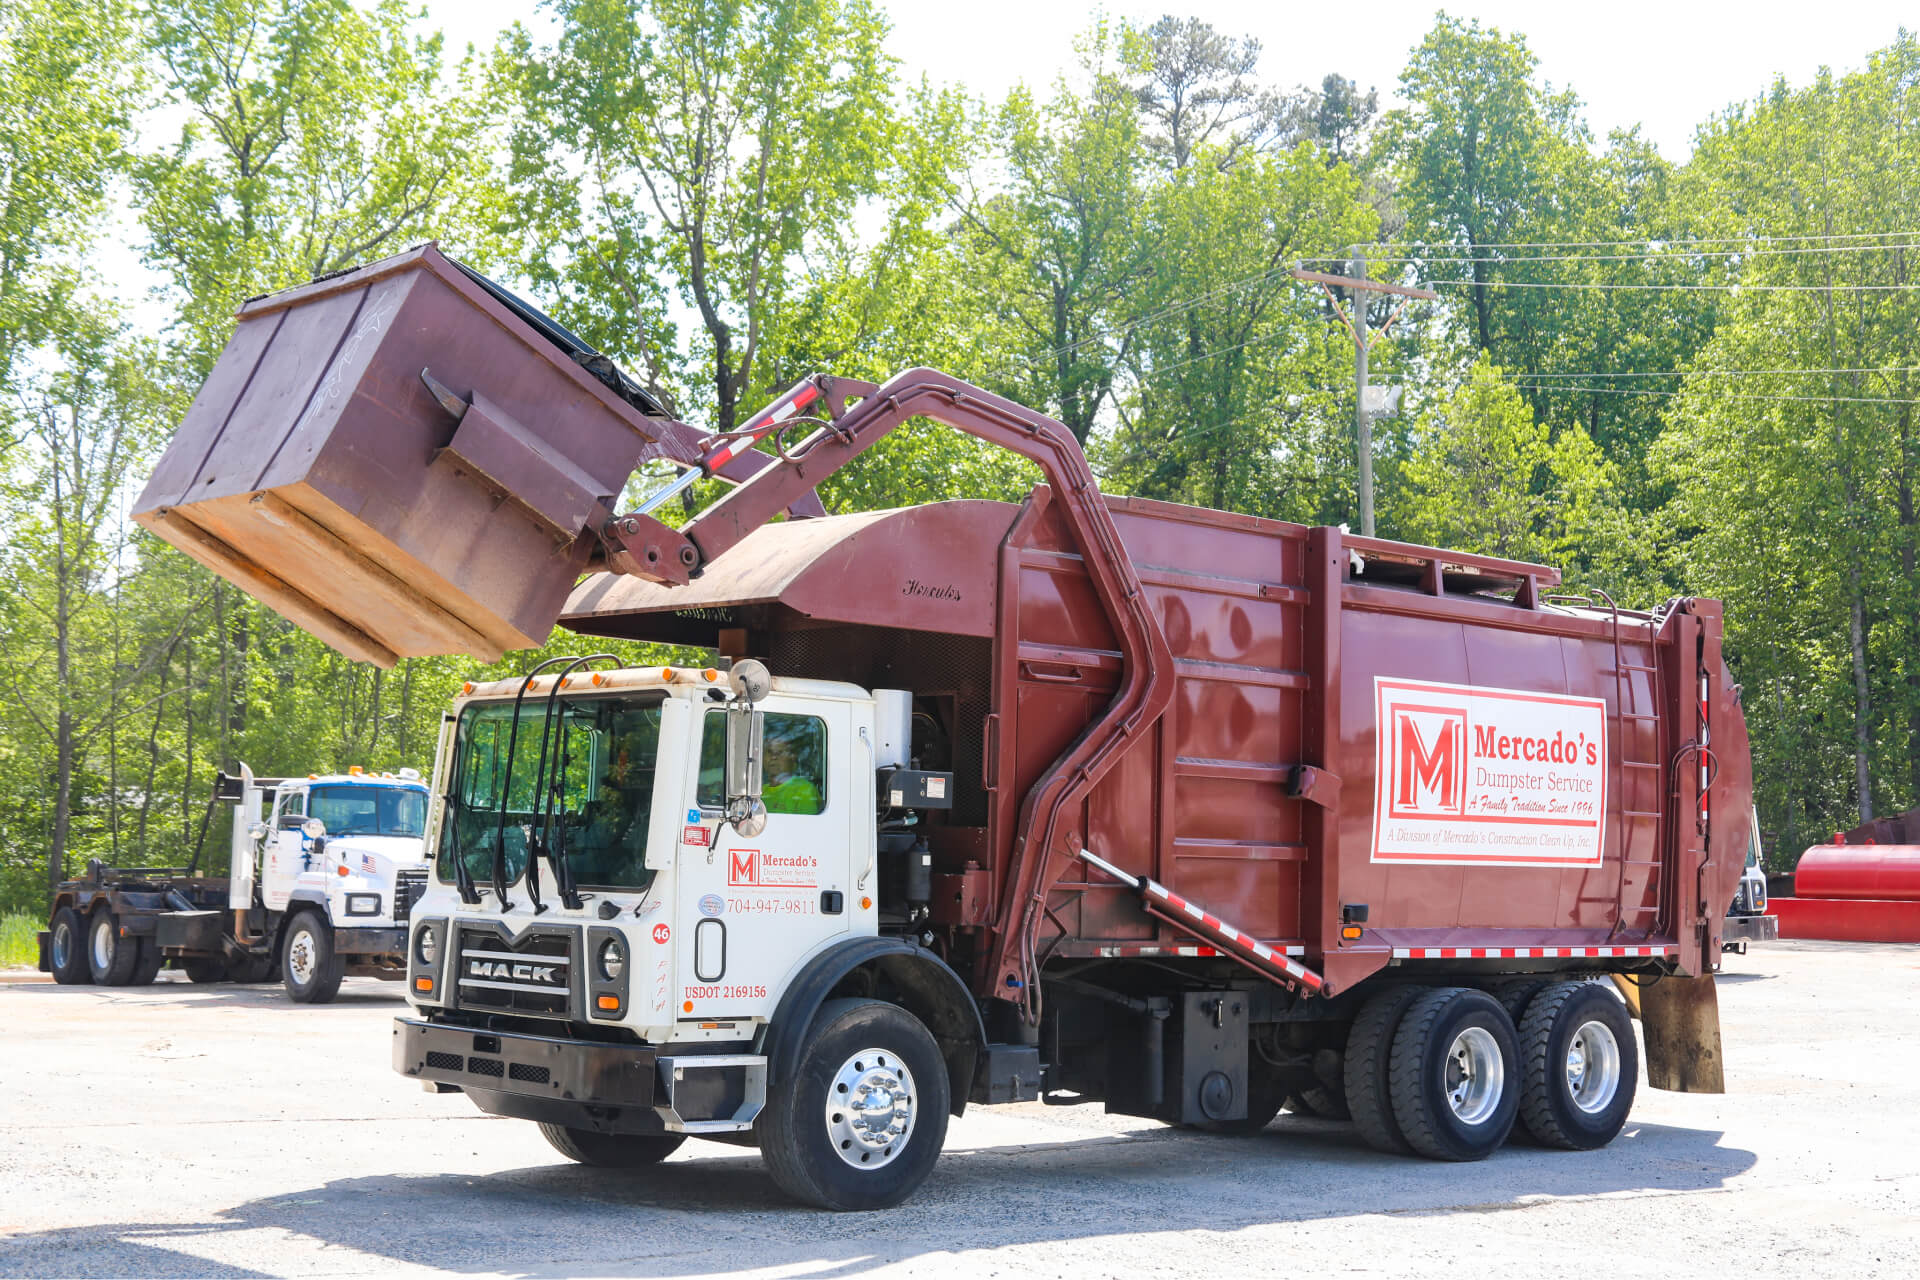 A front load dumpster truck lifting a dumpster labeled with Mercados Dumpsters